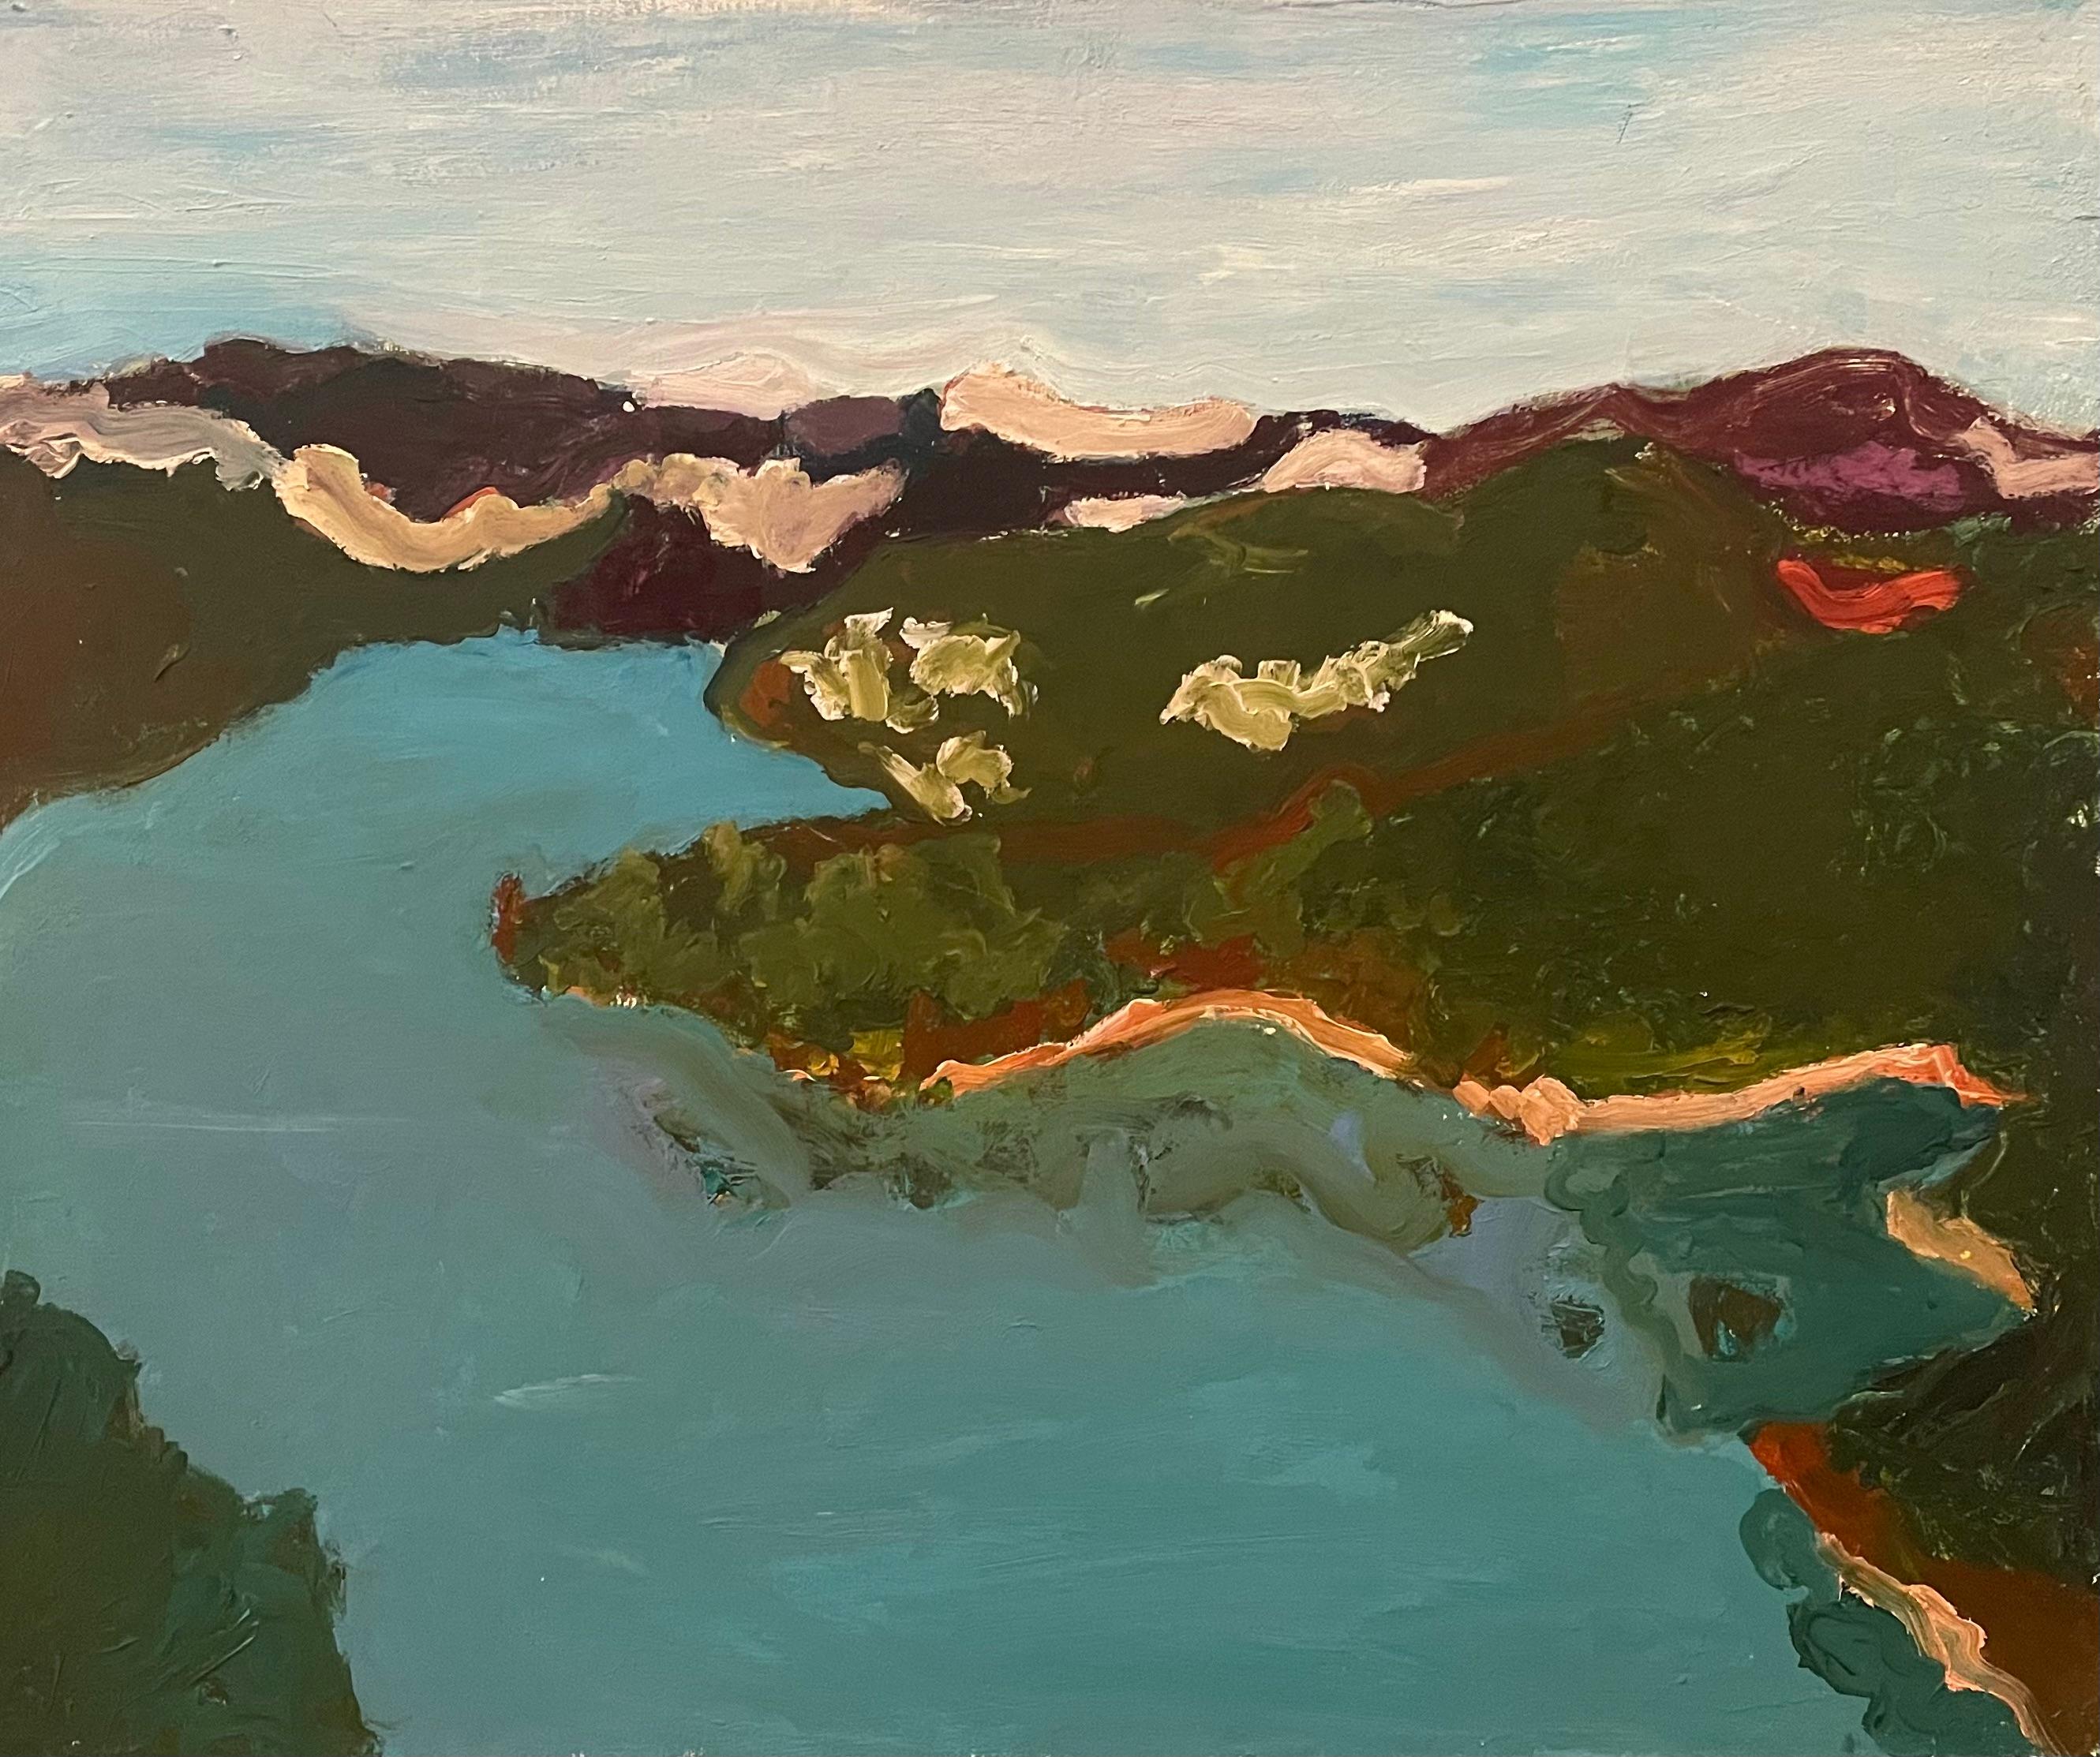 Betsy Podlach’s "Hudson River" is an expressive landscape painted in oil on canvas, capturing the serene and timeless beauty of the famed river. Spanning 25.5" x 30", this piece utilizes a restrained palette of cool blues, earthen greens, and warm